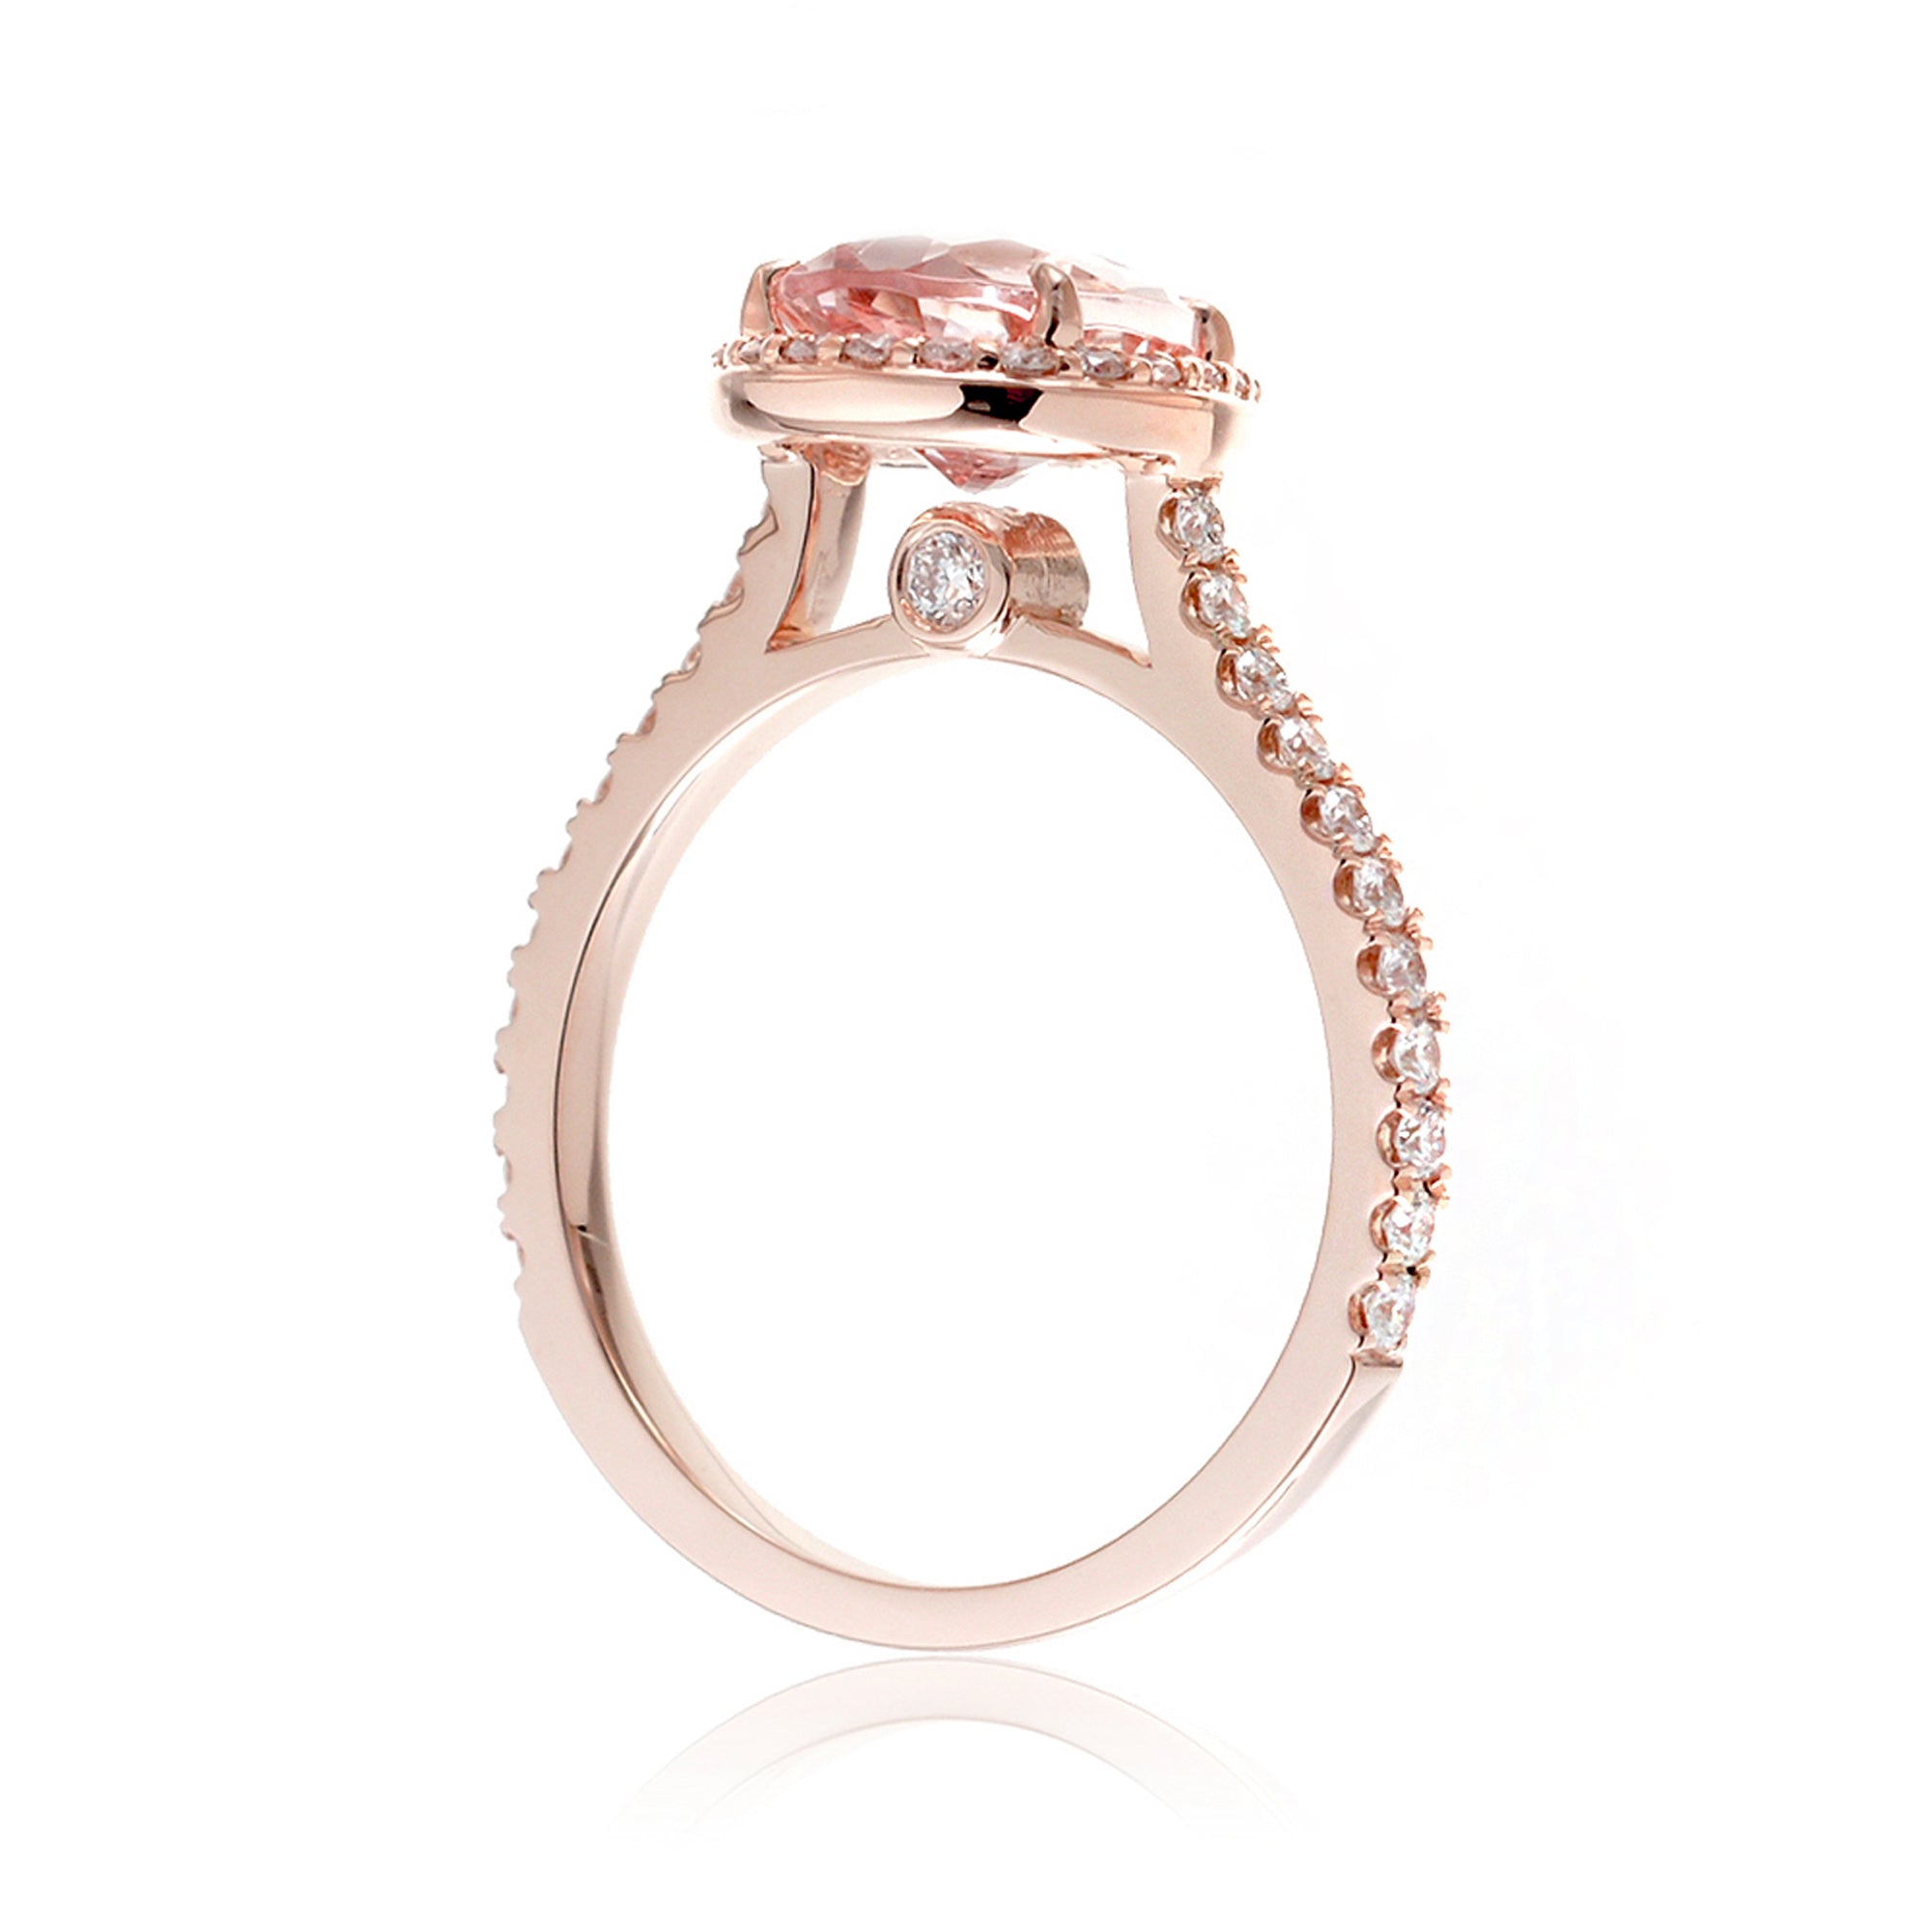 Pear cut morganite ring with diamond halo and band in the Sunset rose gold